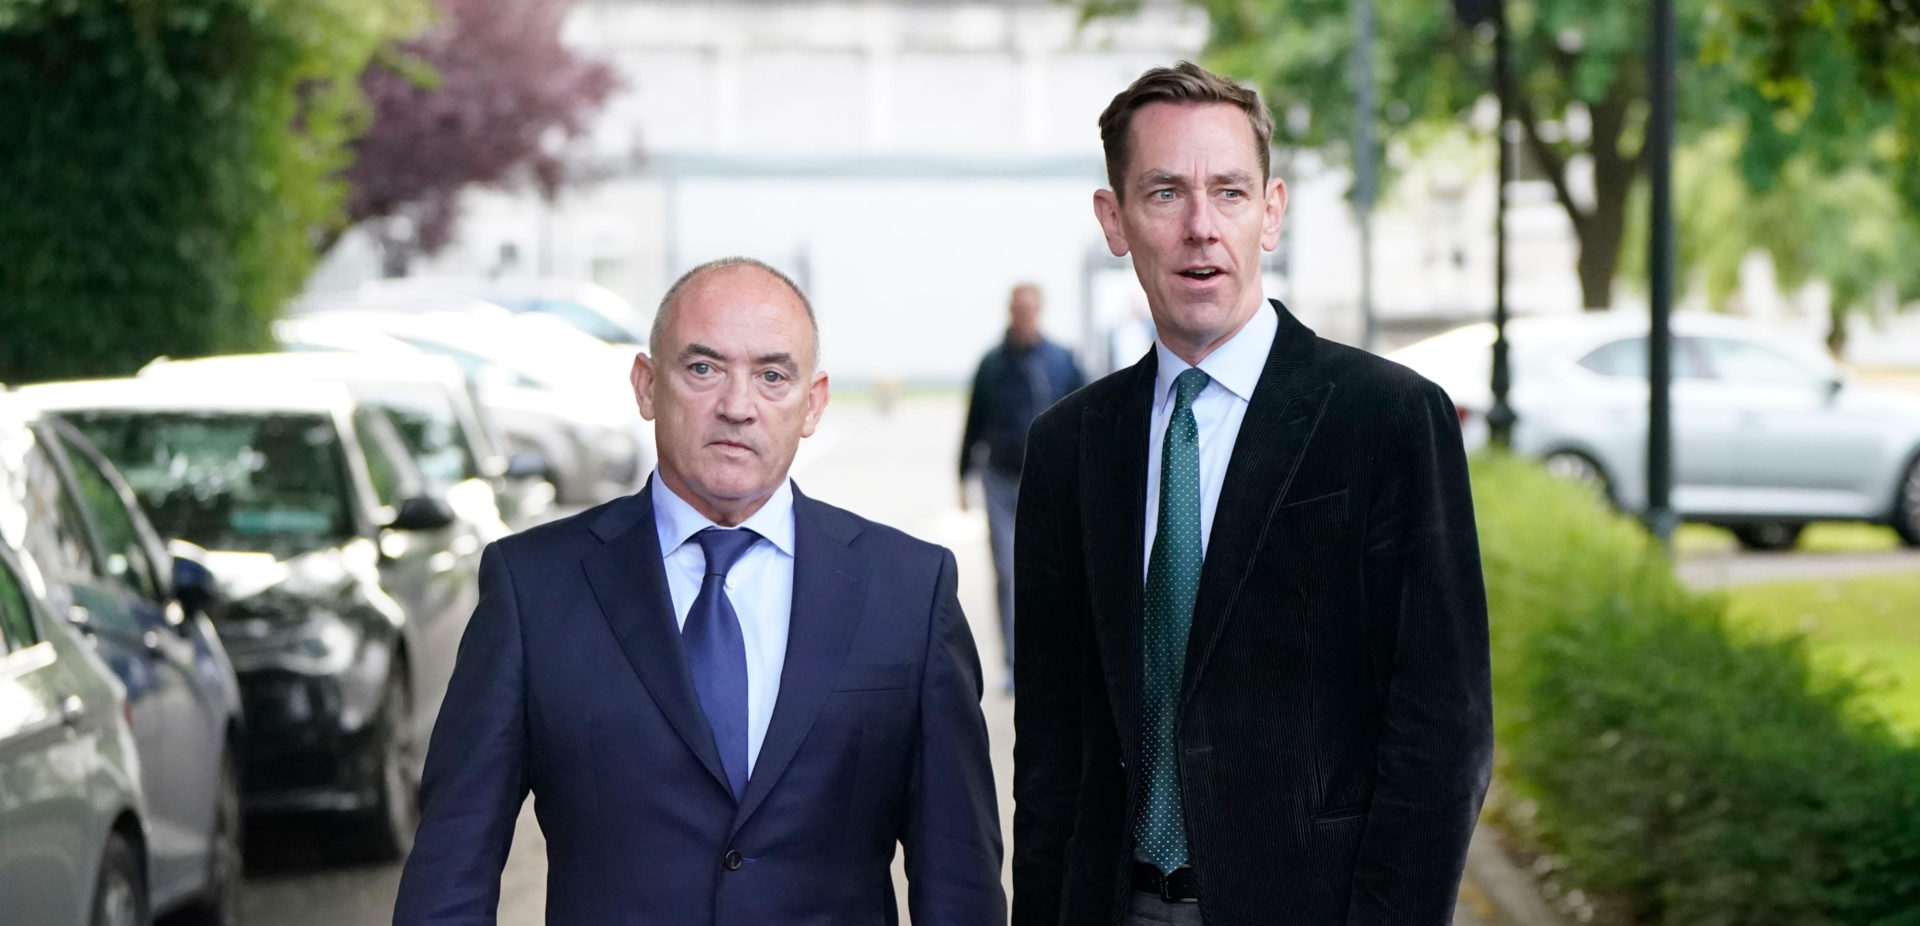 Ryan Tubridy with his agent Noel Kelly leaving Leinster House, Dublin